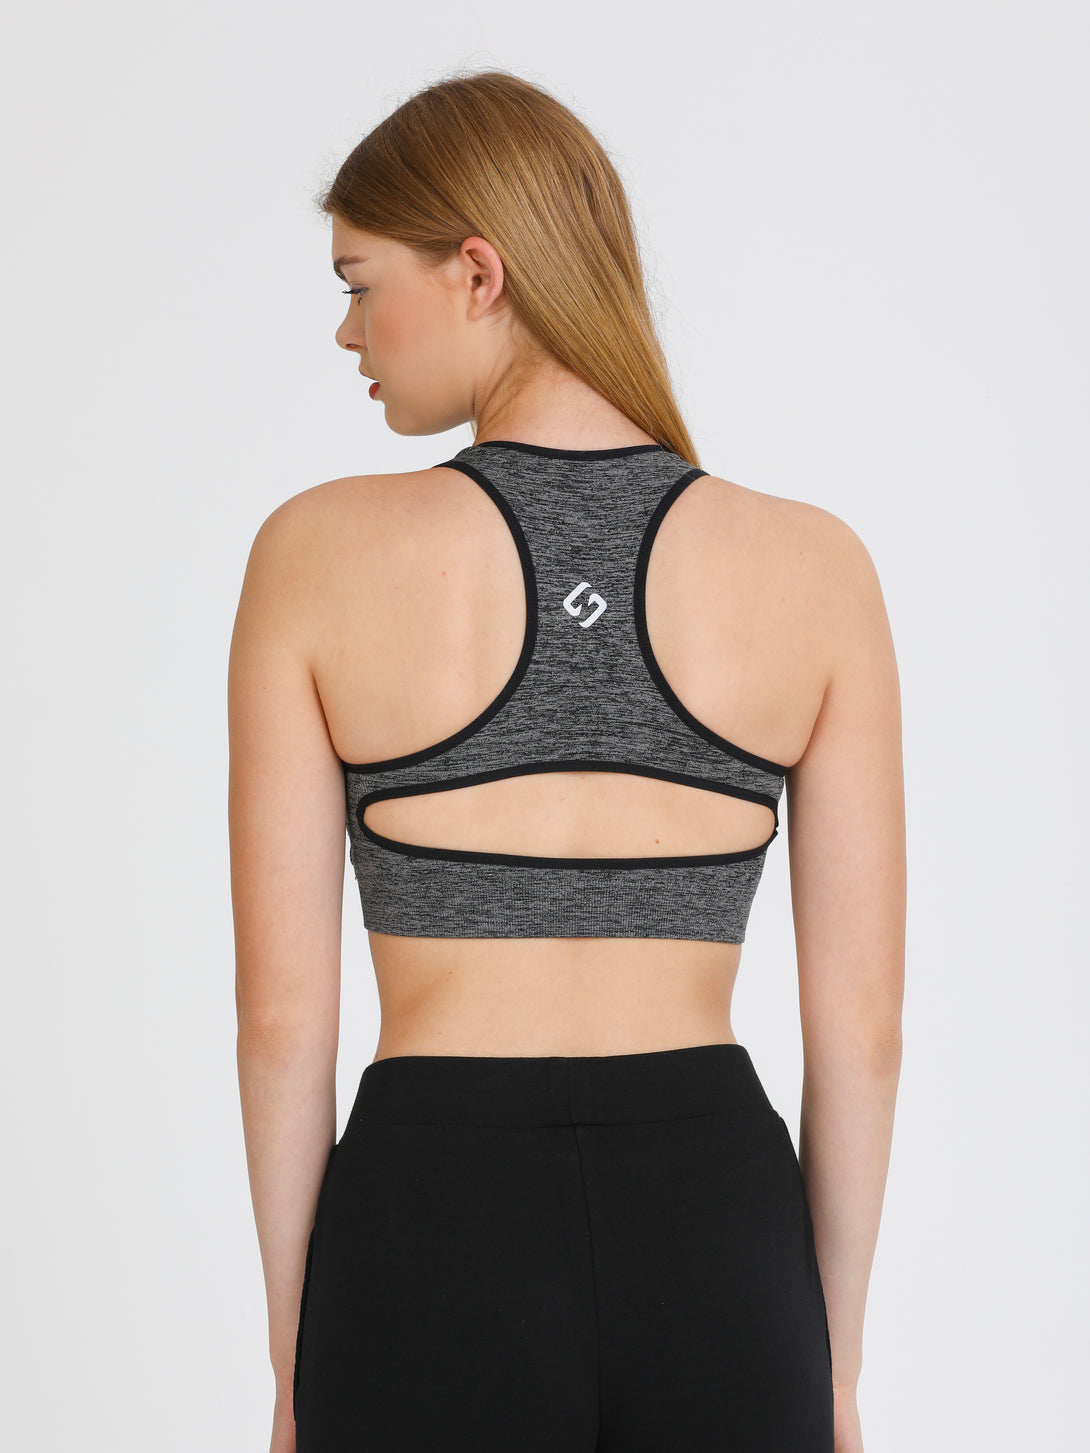 A Woman Wearing Black Color Seamless Medium Support Sports Bra